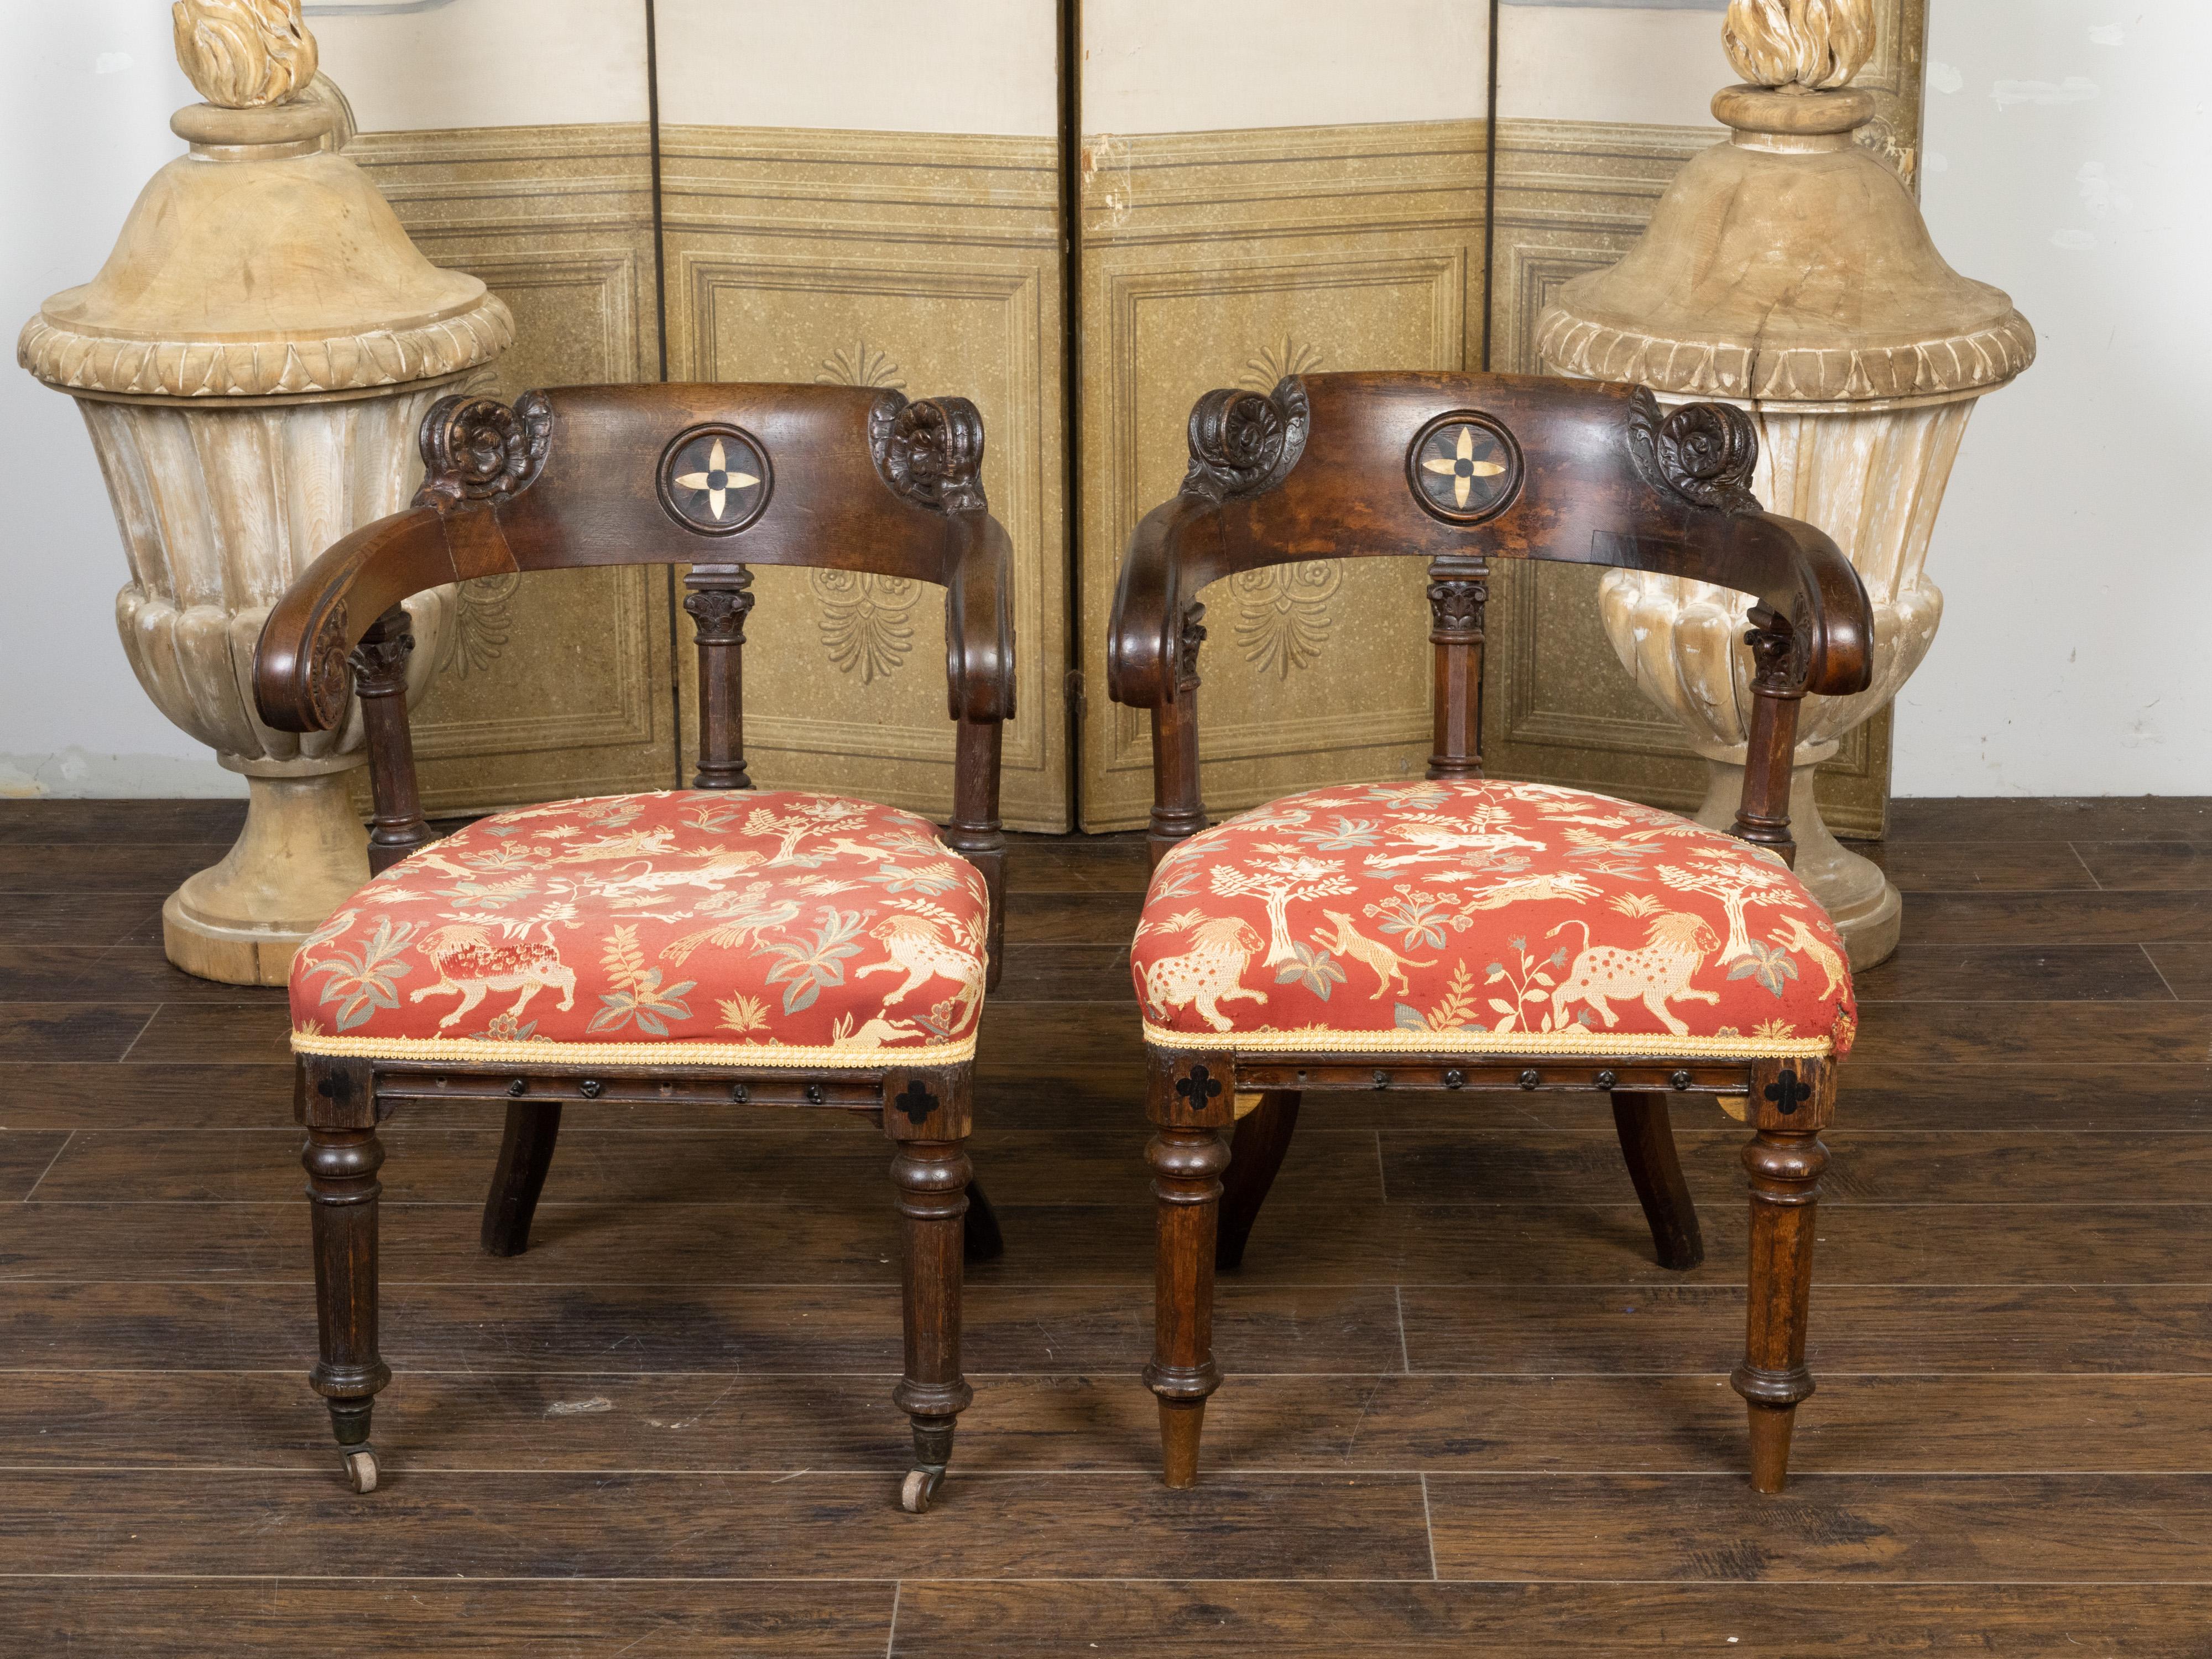 A pair of English Regency style oak Klismos chairs from the 19th century, with carved scrolling decor, geometric inlay and old fabric. Created in England during the 19th century, each of this pair of Regency style Klismos chairs features a horseshoe